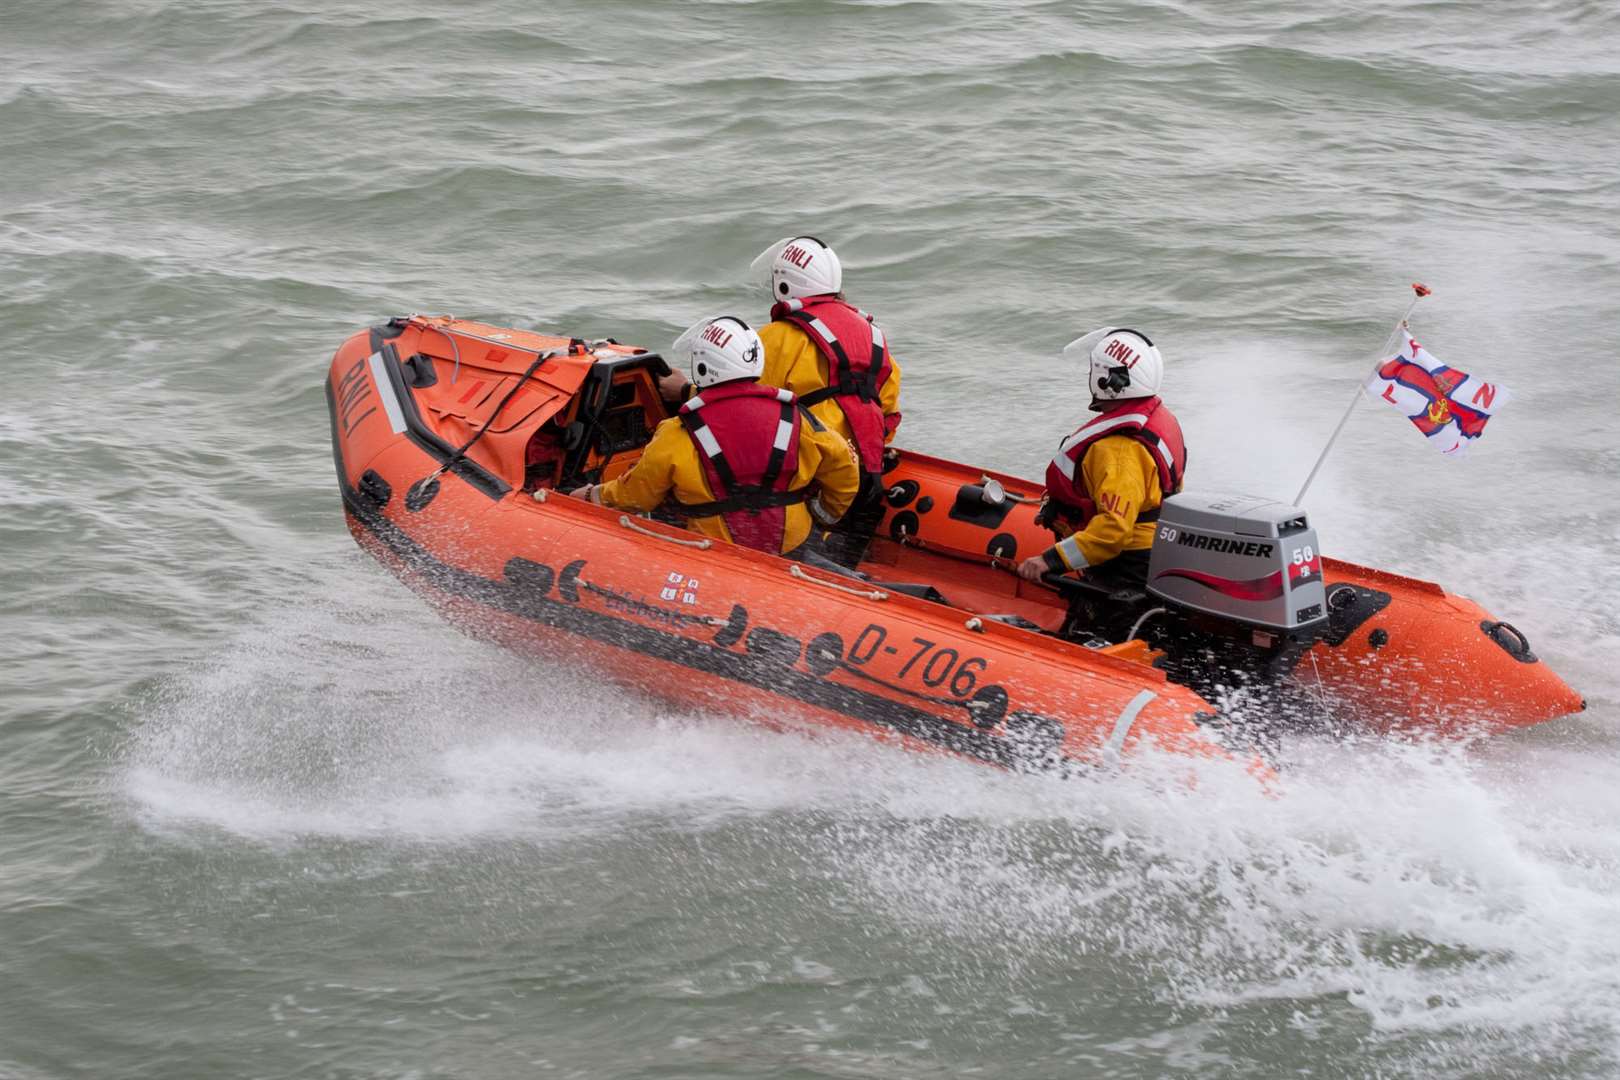 Margate's inshore lifeboat was called to help with a woman in distress